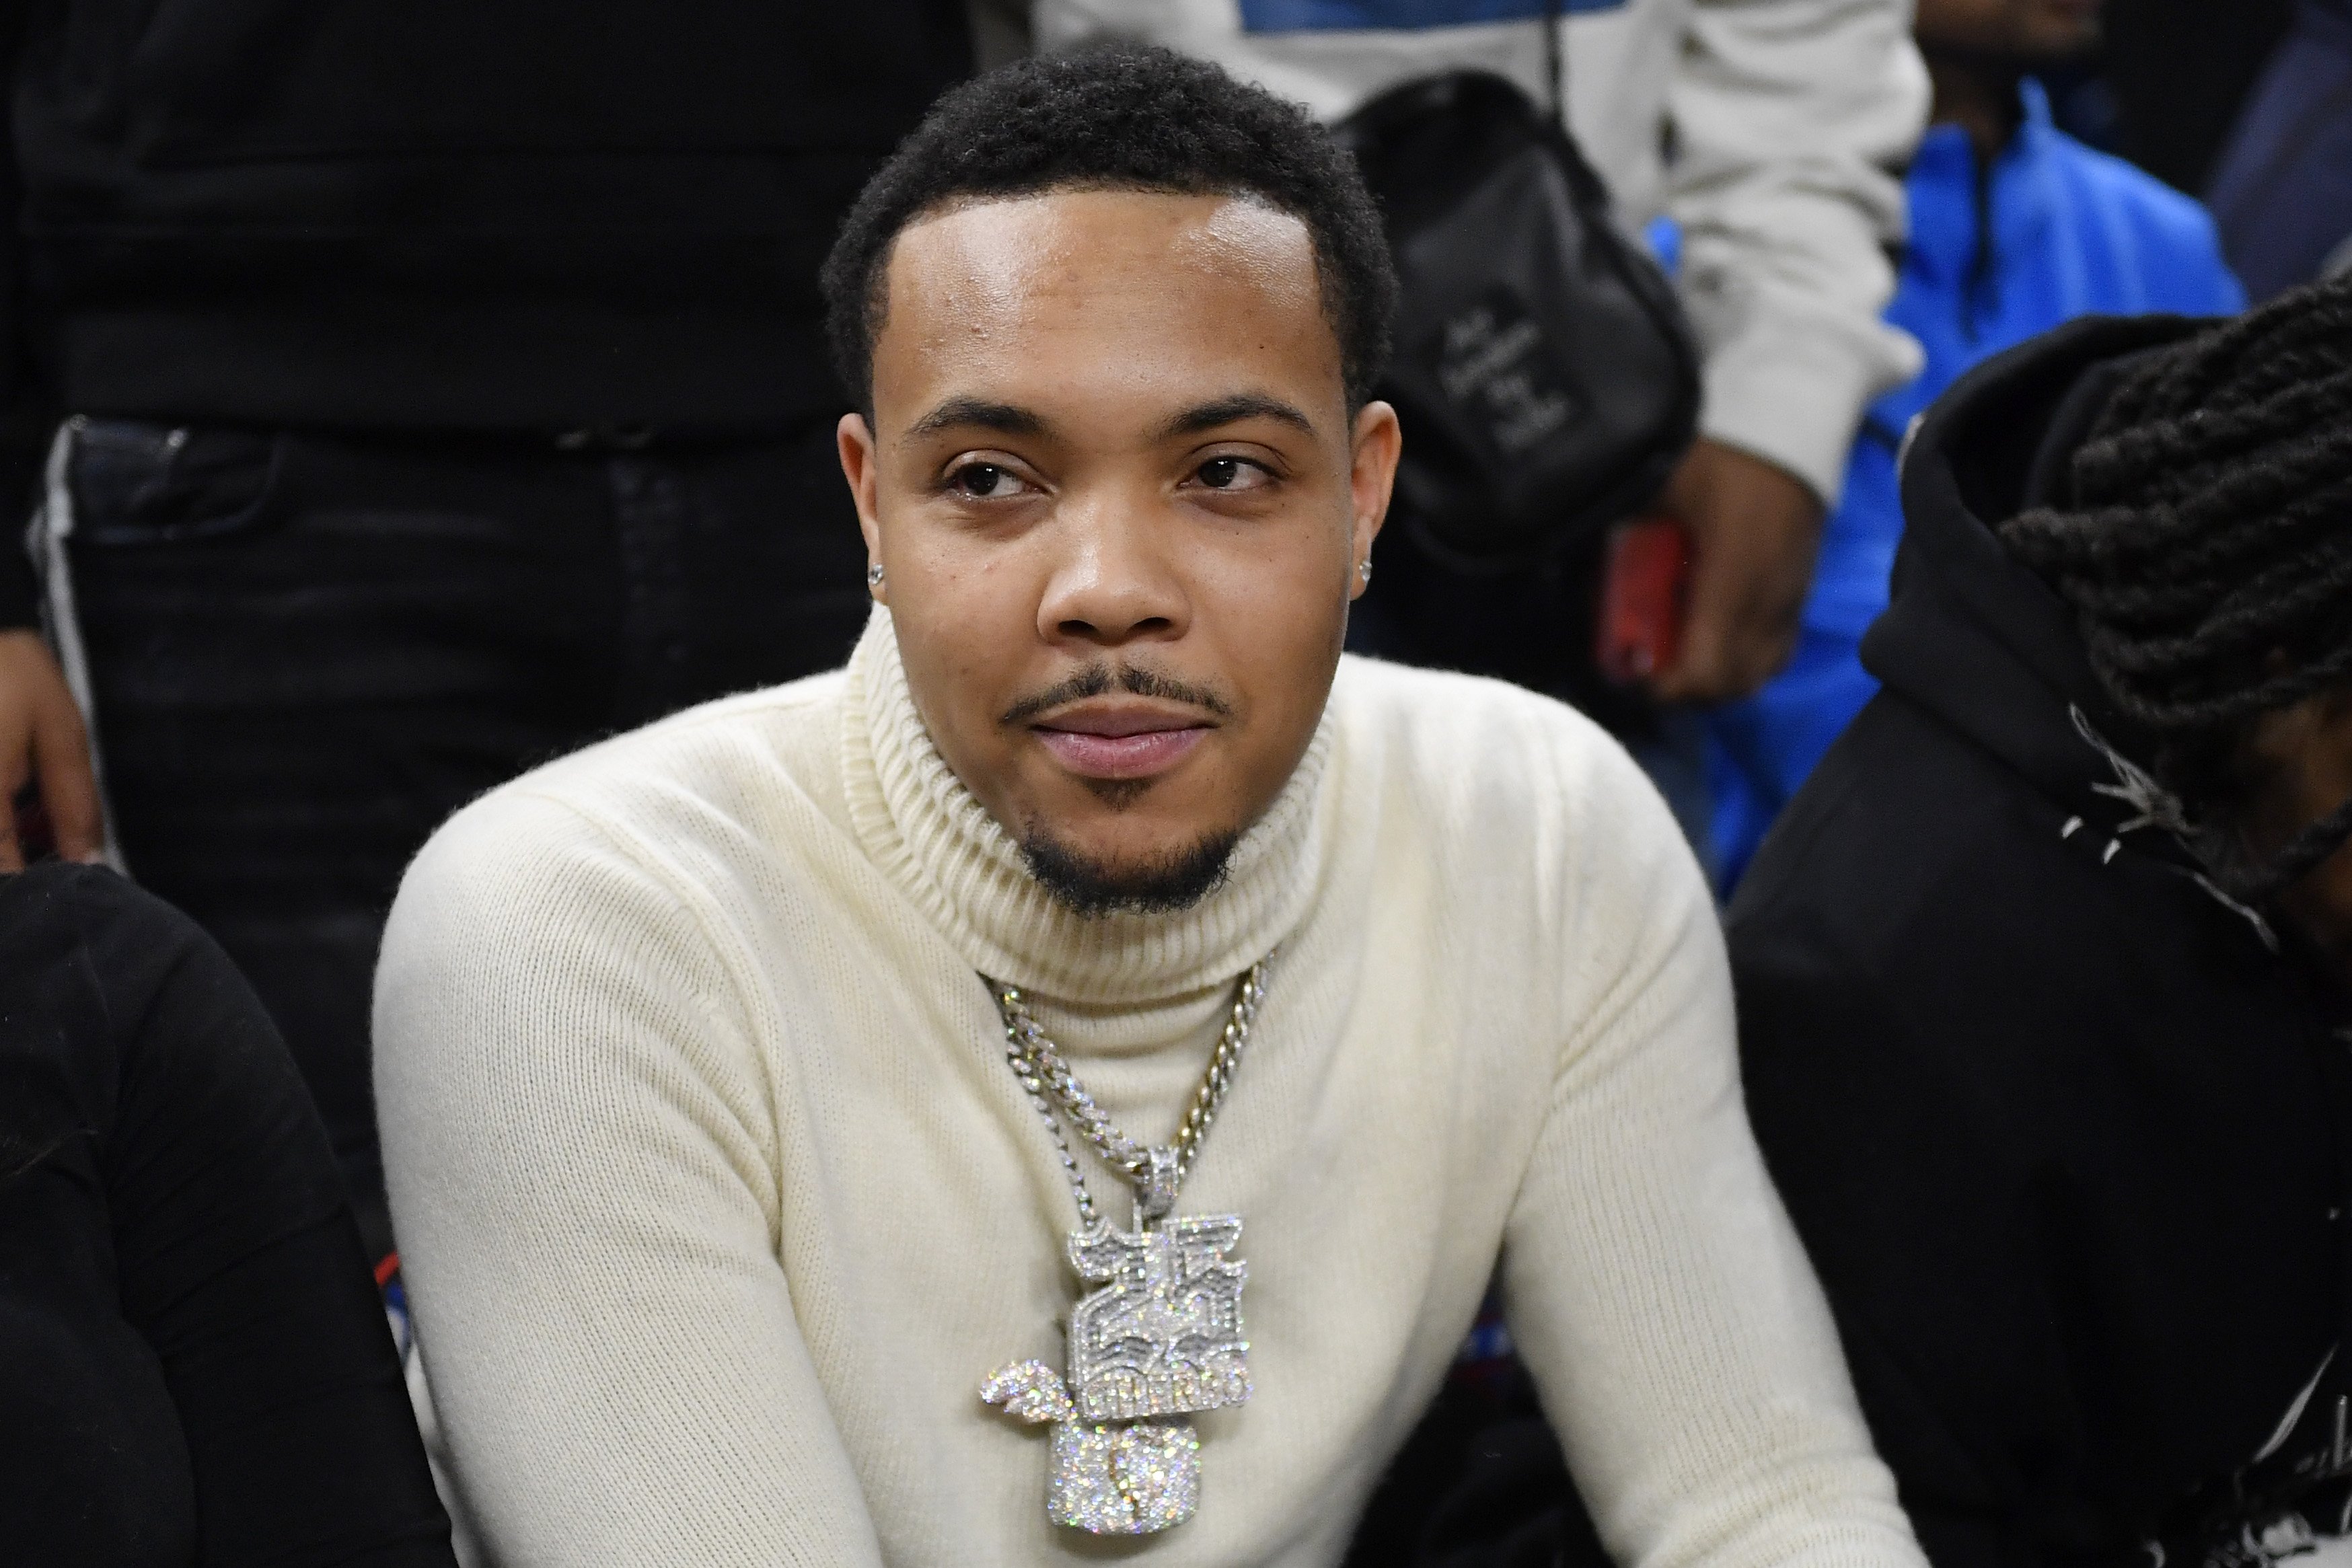 G Herbo at the game between Glenbard West HS and Sierra Canyon HS in Chicago on February 5, 2022 | Source: Getty Images